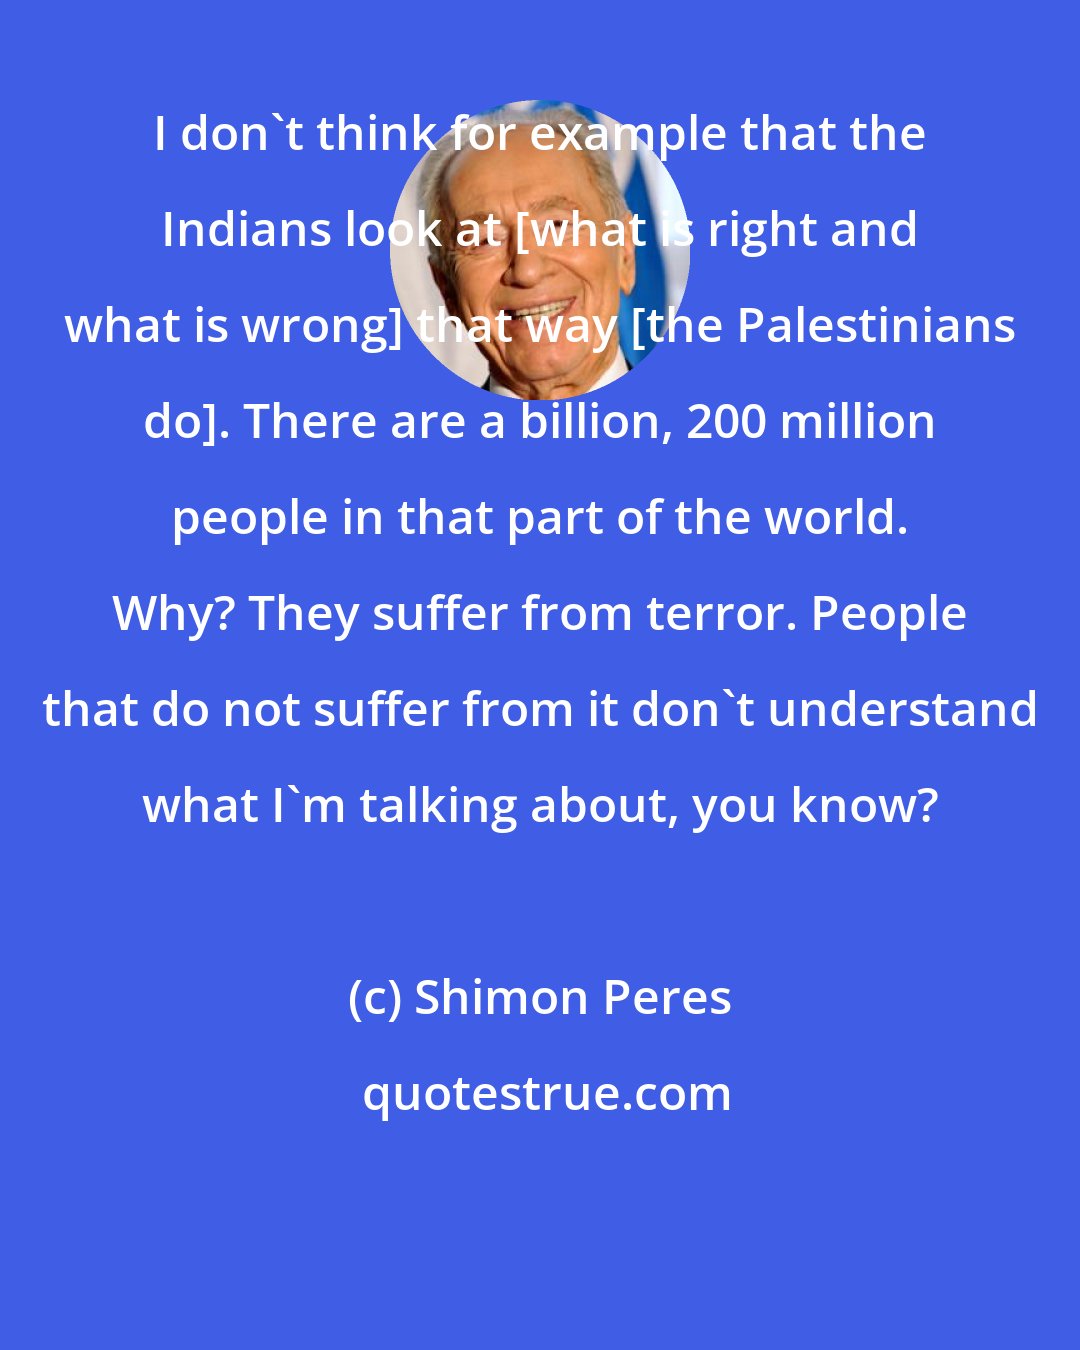 Shimon Peres: I don't think for example that the Indians look at [what is right and what is wrong] that way [the Palestinians do]. There are a billion, 200 million people in that part of the world. Why? They suffer from terror. People that do not suffer from it don't understand what I'm talking about, you know?